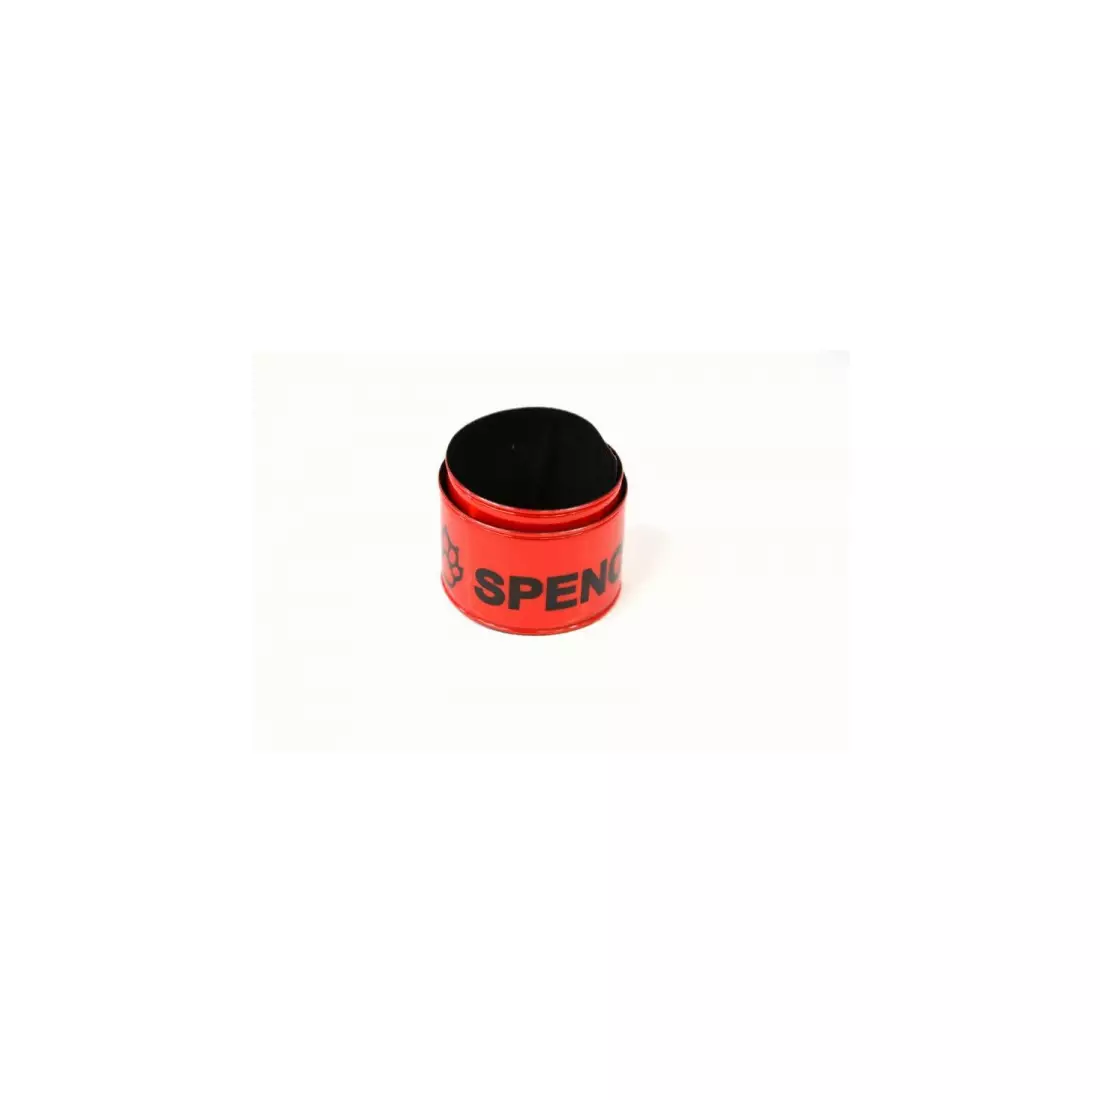 SPENCER red reflective armband